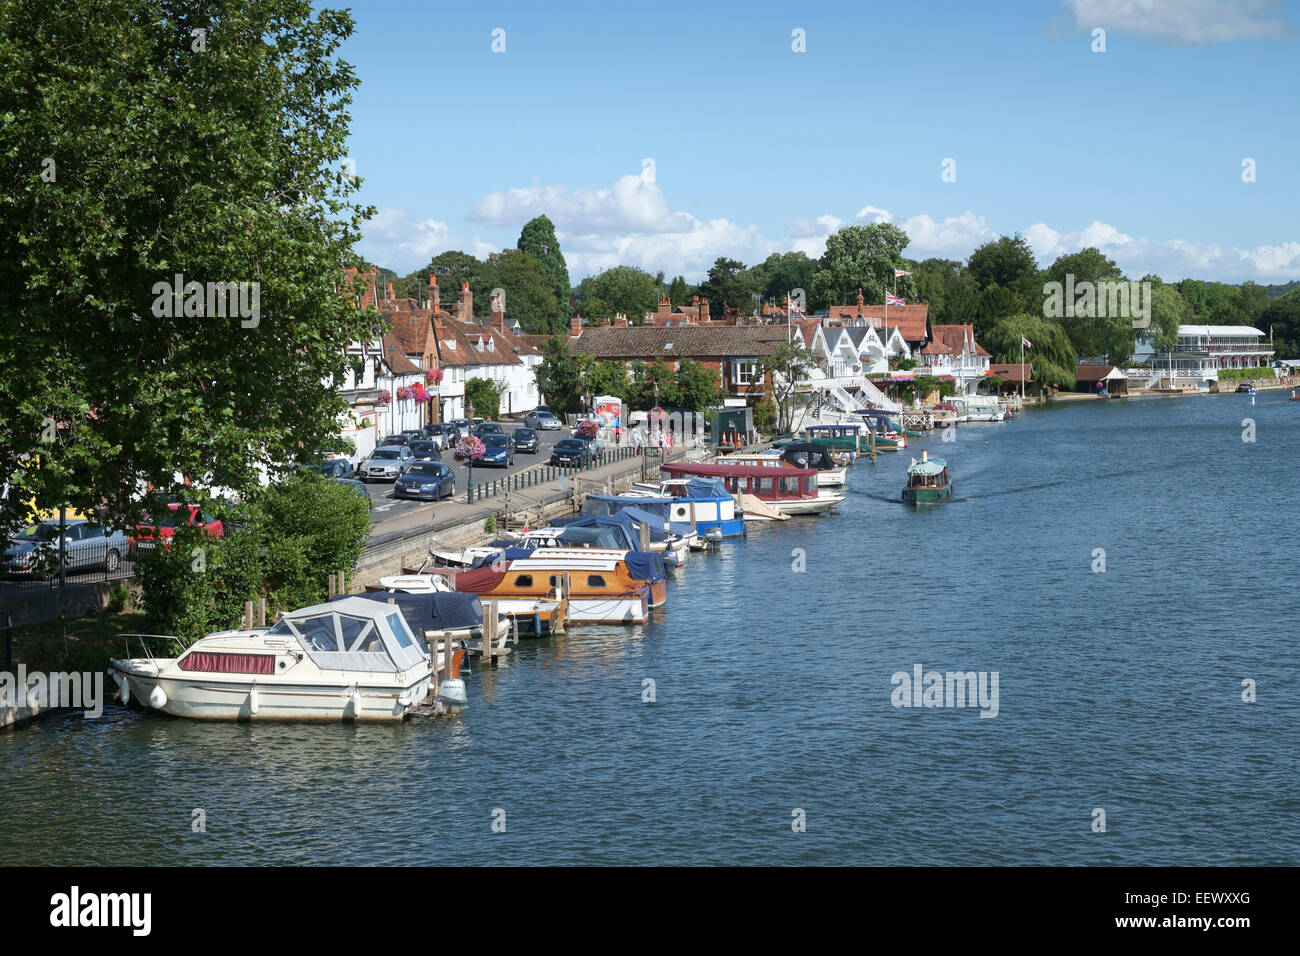 England, Oxfordshire, Henley-on-Thames: Pleasure boats moored on the river Thames Stock Photo